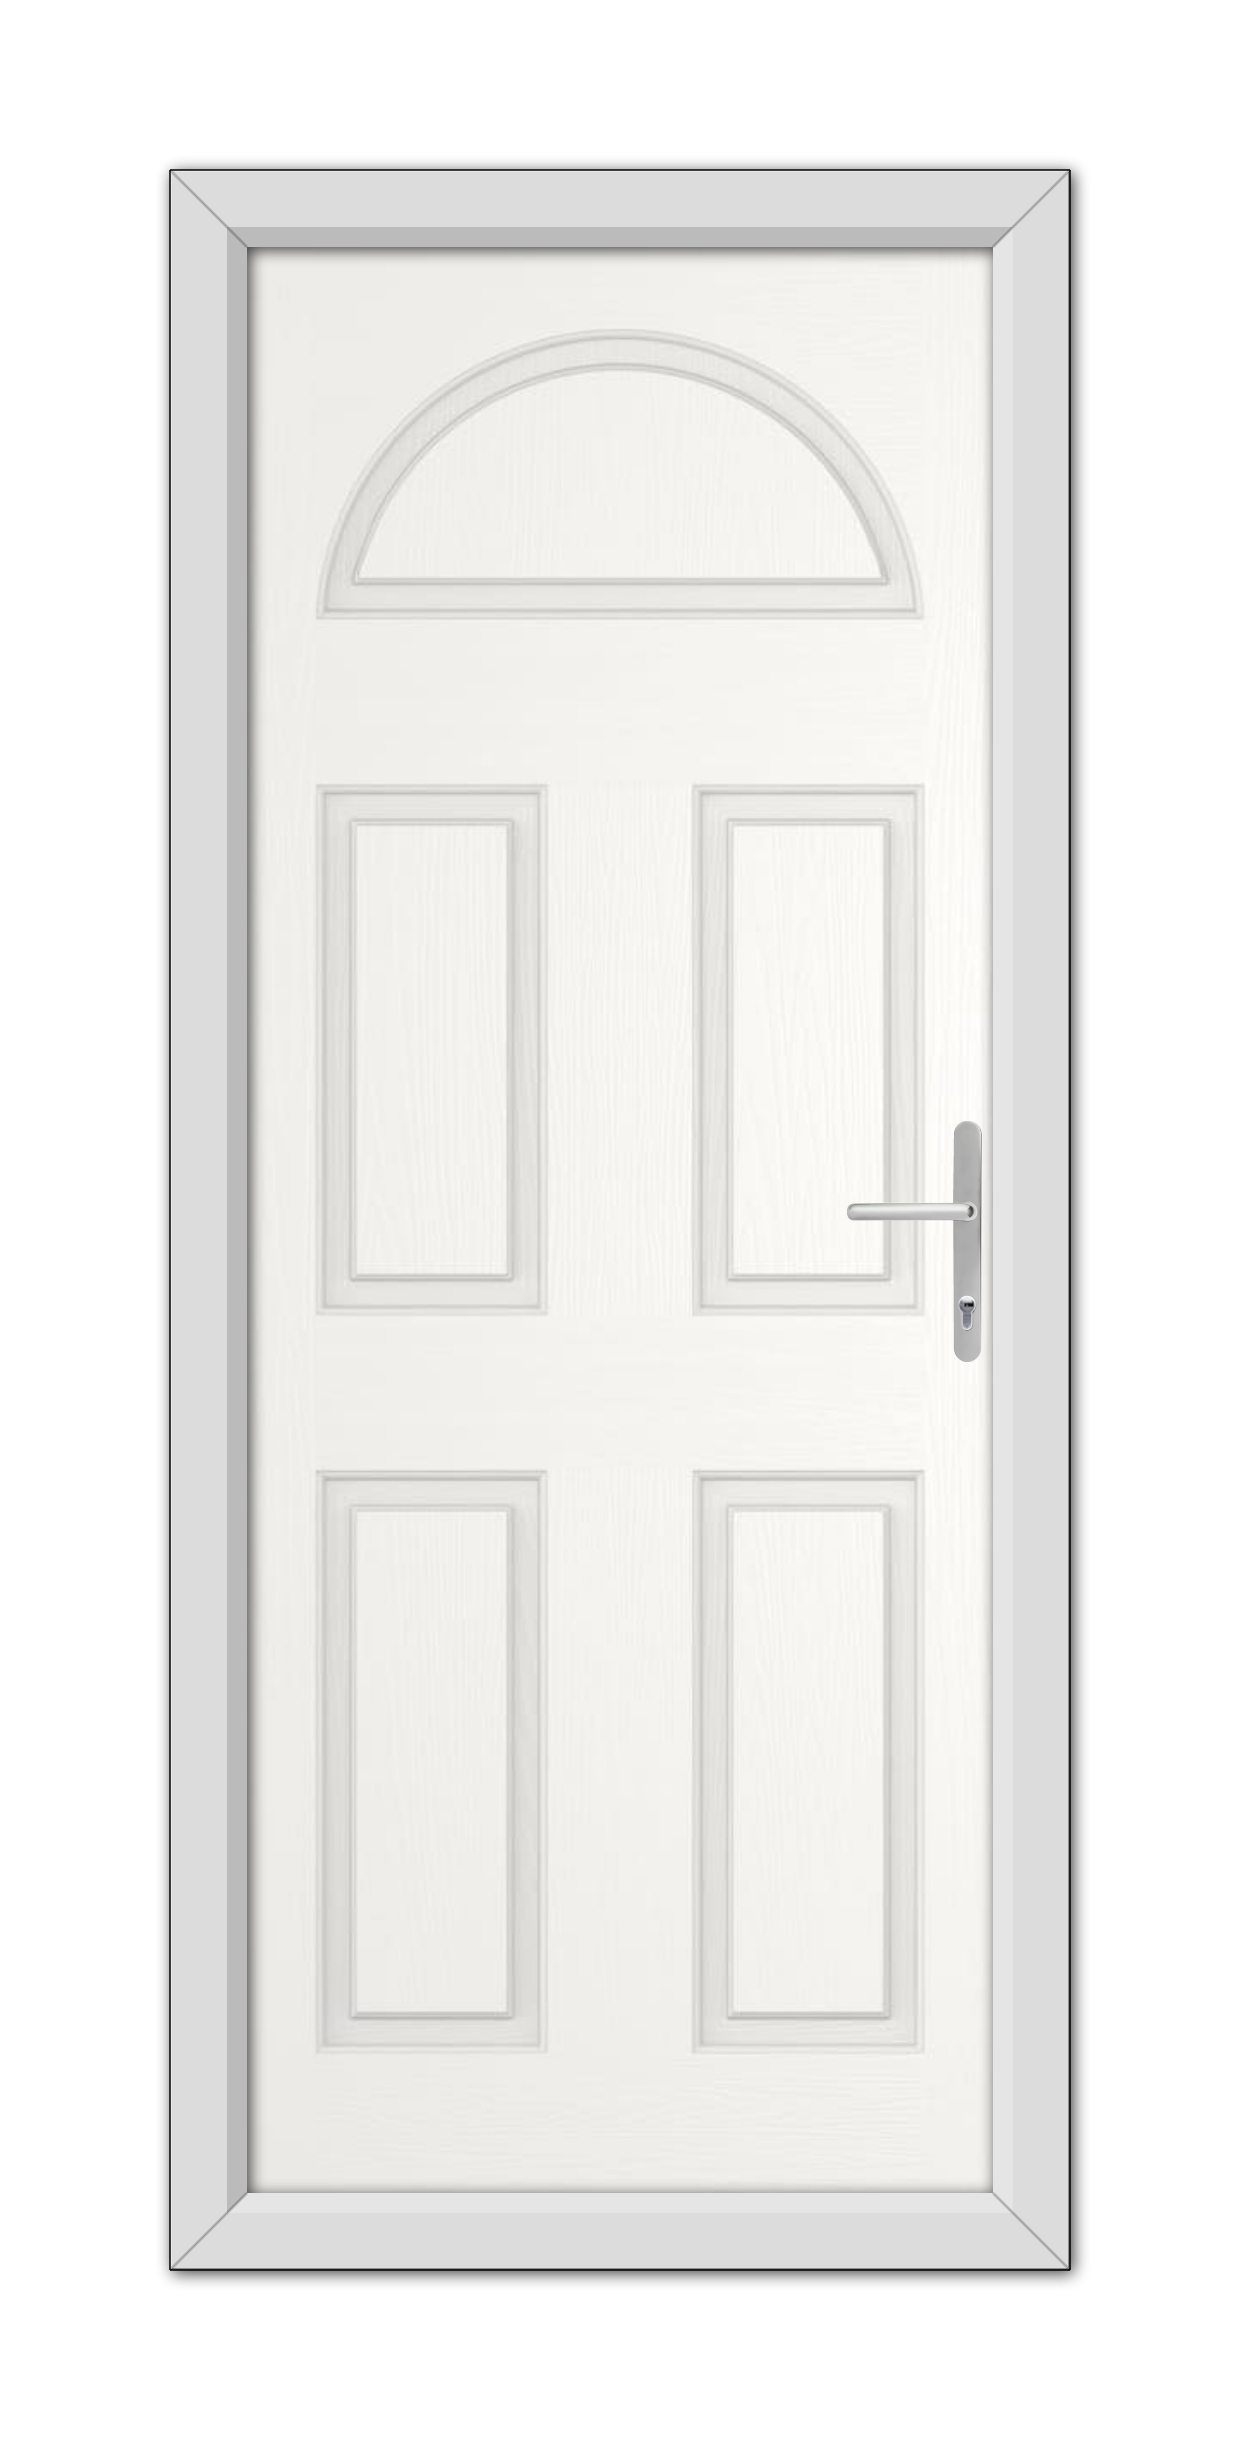 A White Middleton Solid Stable Composite Door 48mm Timber Core with an arched window at the top and a metallic handle, set within a simple frame.